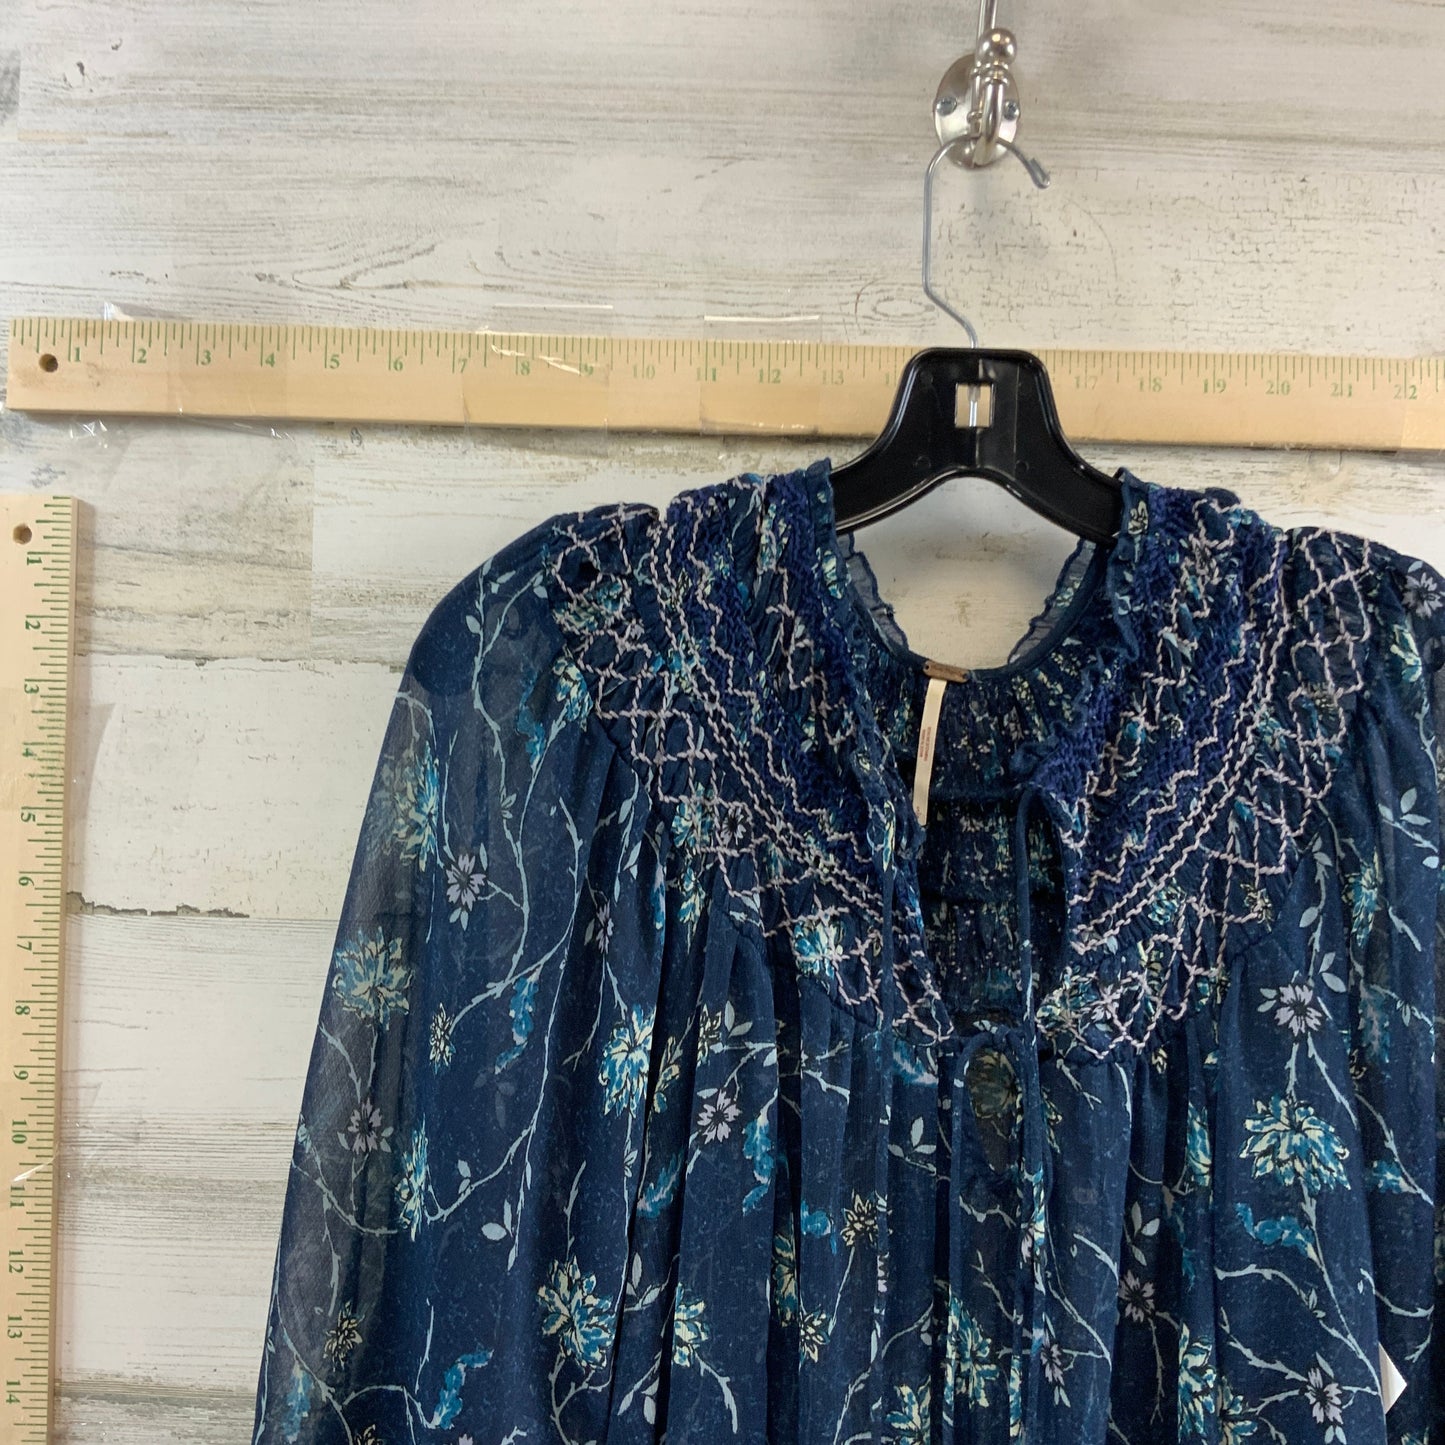 Blue Top Long Sleeve Free People, Size S